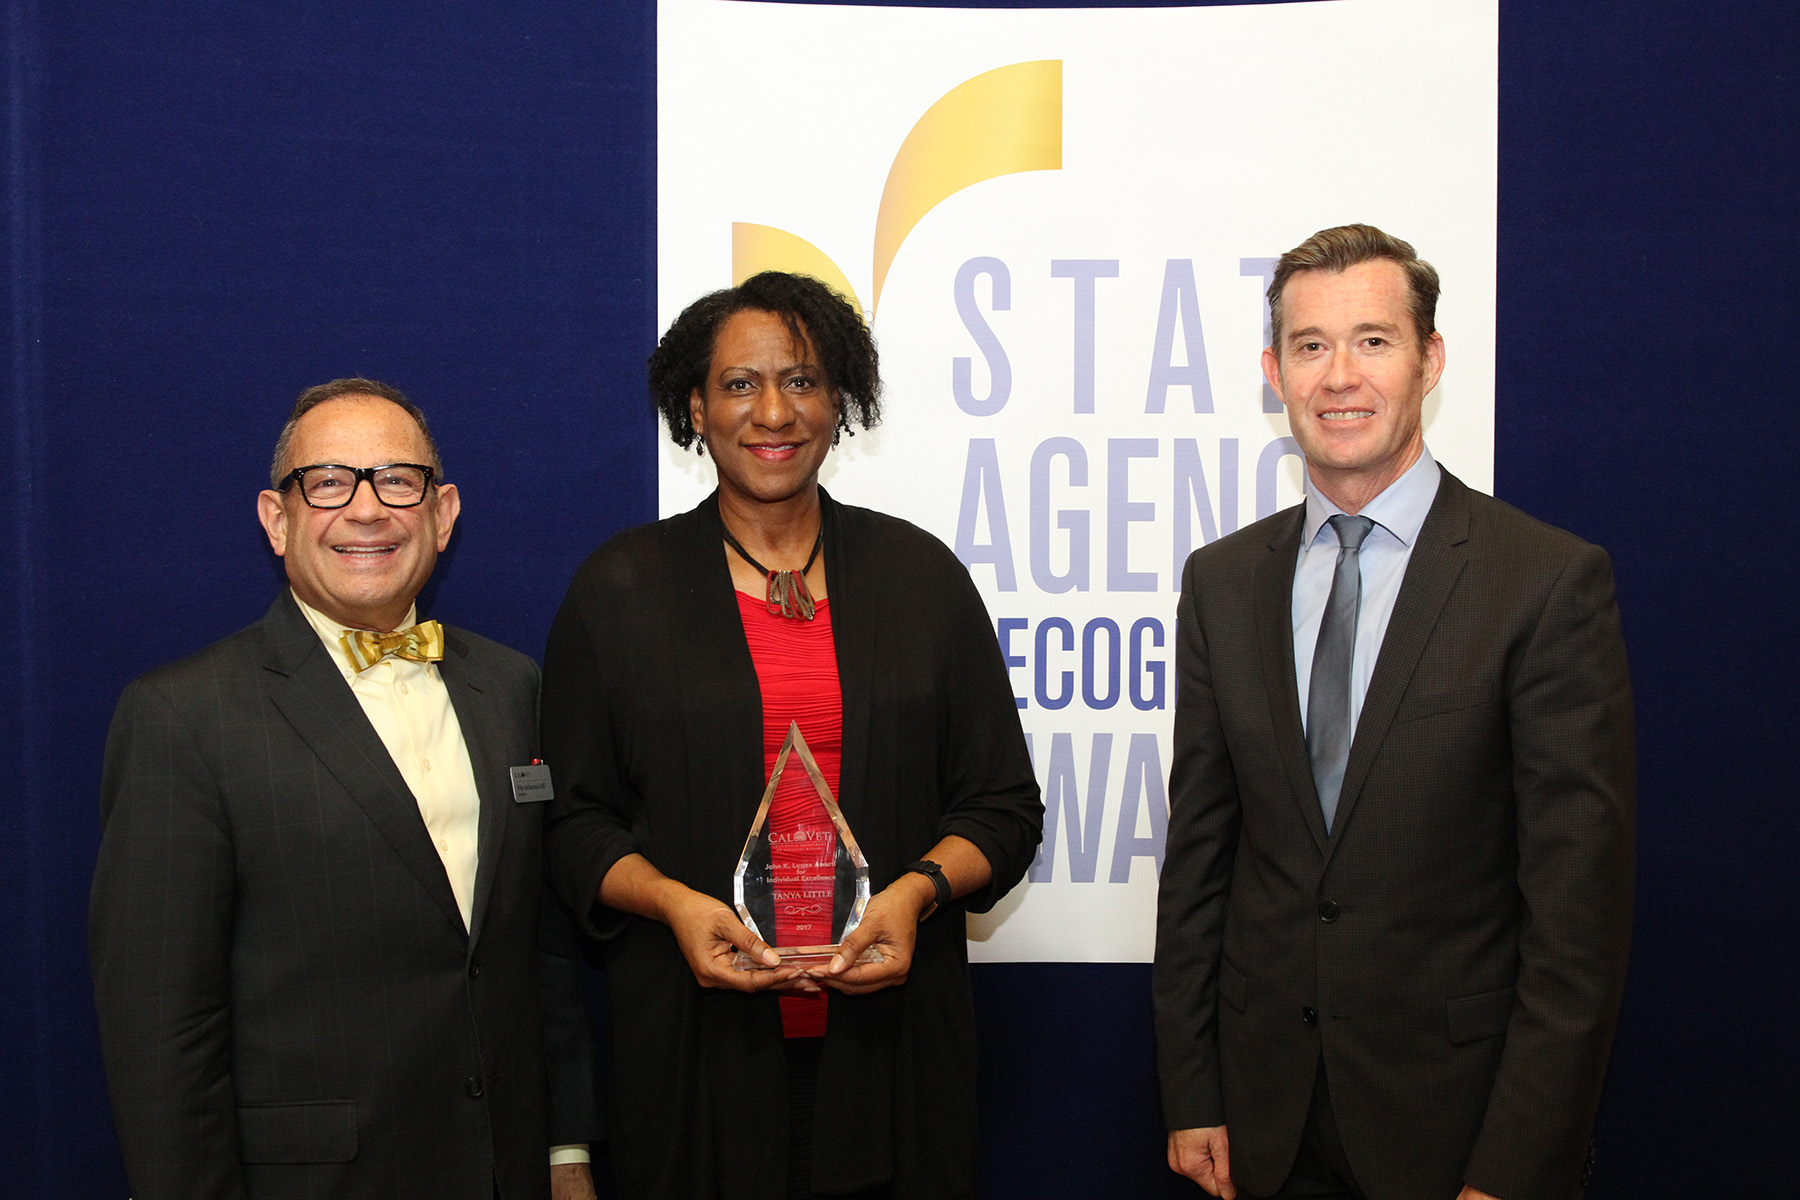 Individual Excellence - Tanya Little, Business Development Program Manager, Department of General Services